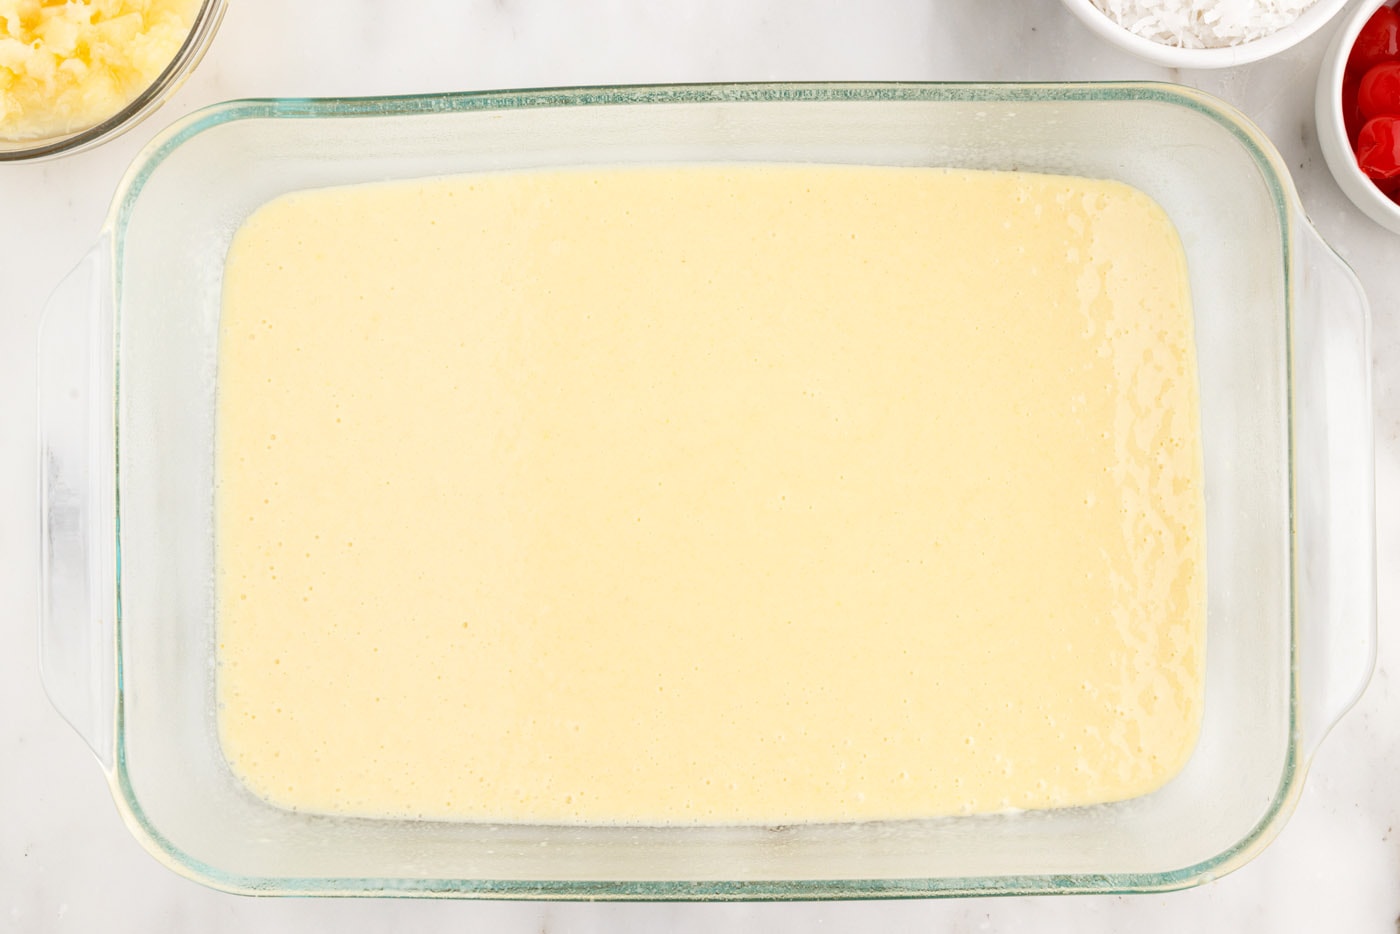 cake mix batter in a baking dish